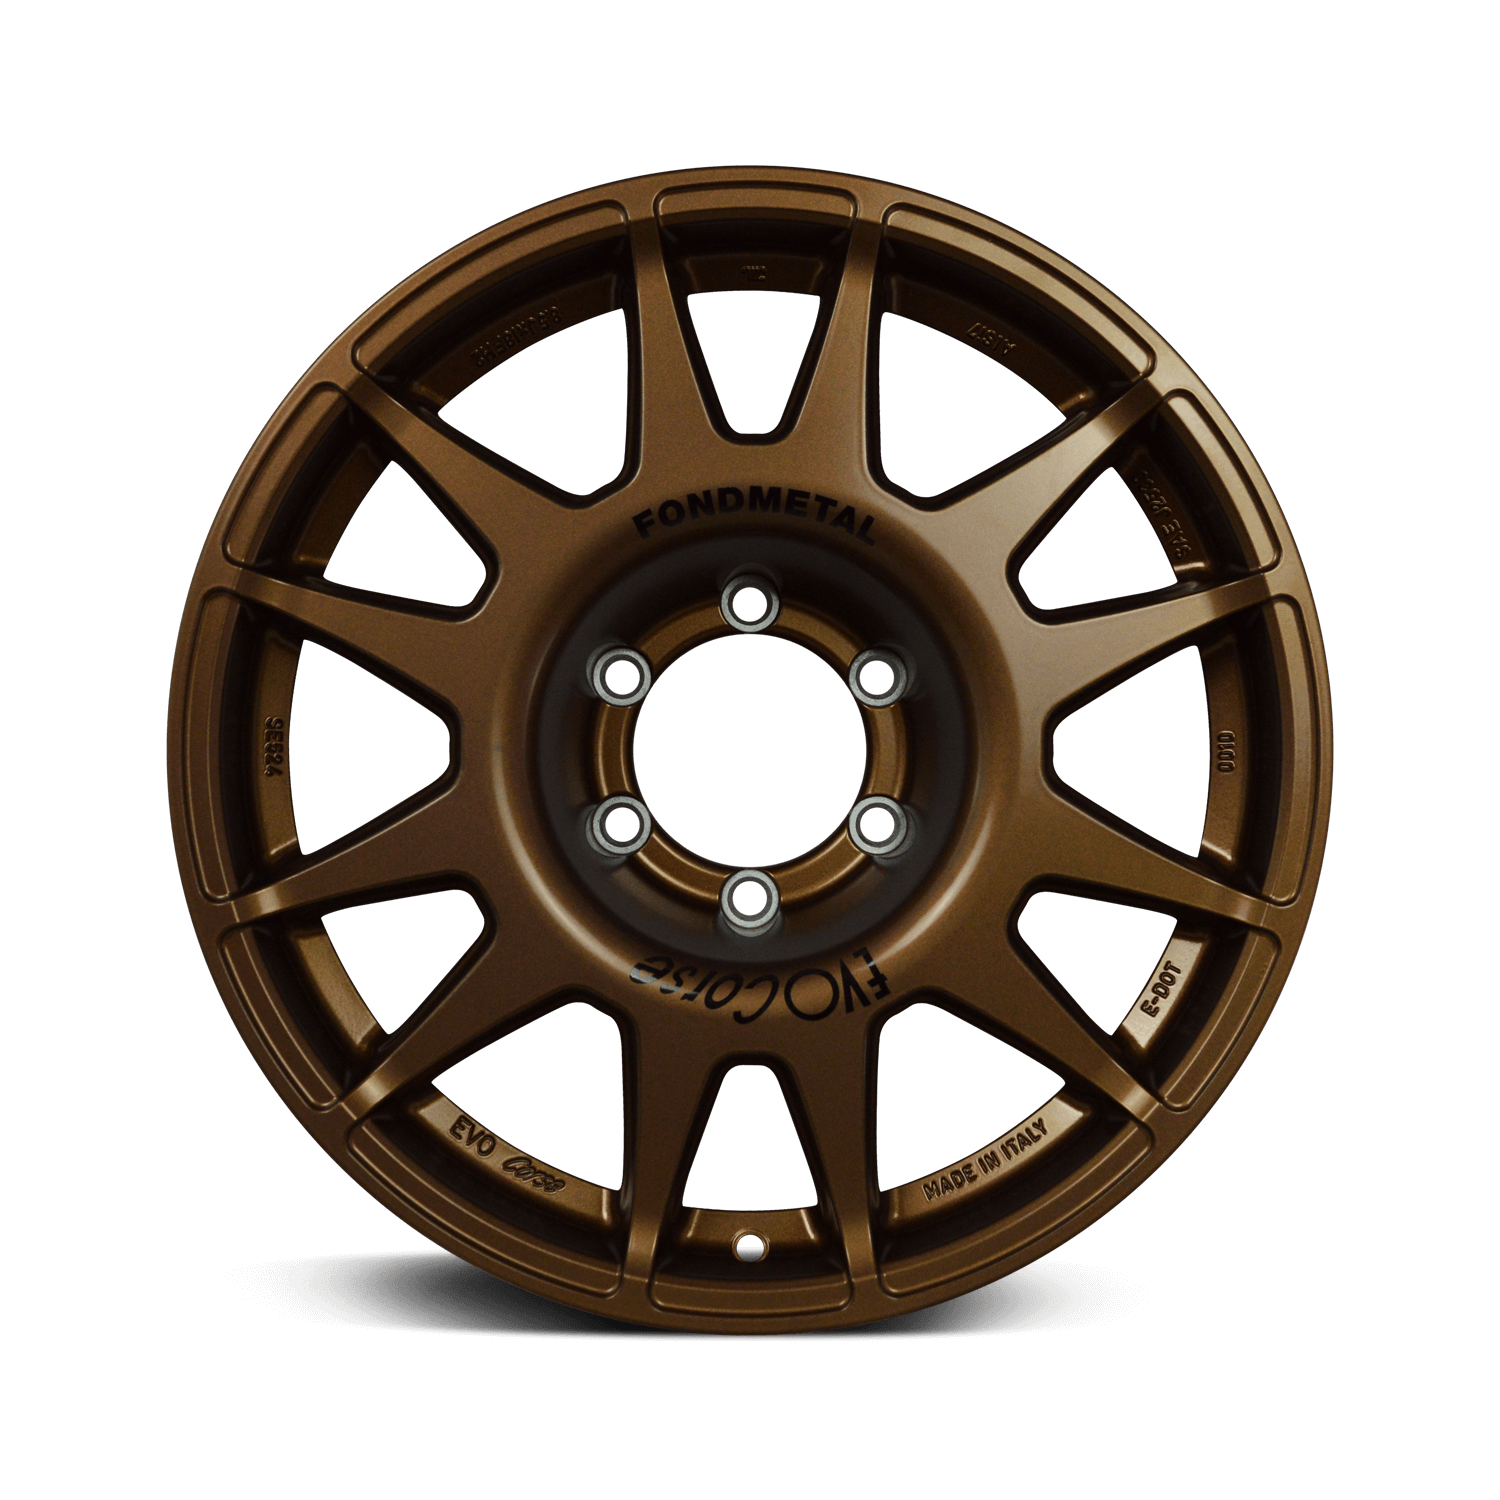 Evo Corse wheel front view mat bronze, for toyota land cruiser 300 series. the 4x4 off road allow wheel with the highest high load rating for overlanding, rally, 4wd expedition use in australia